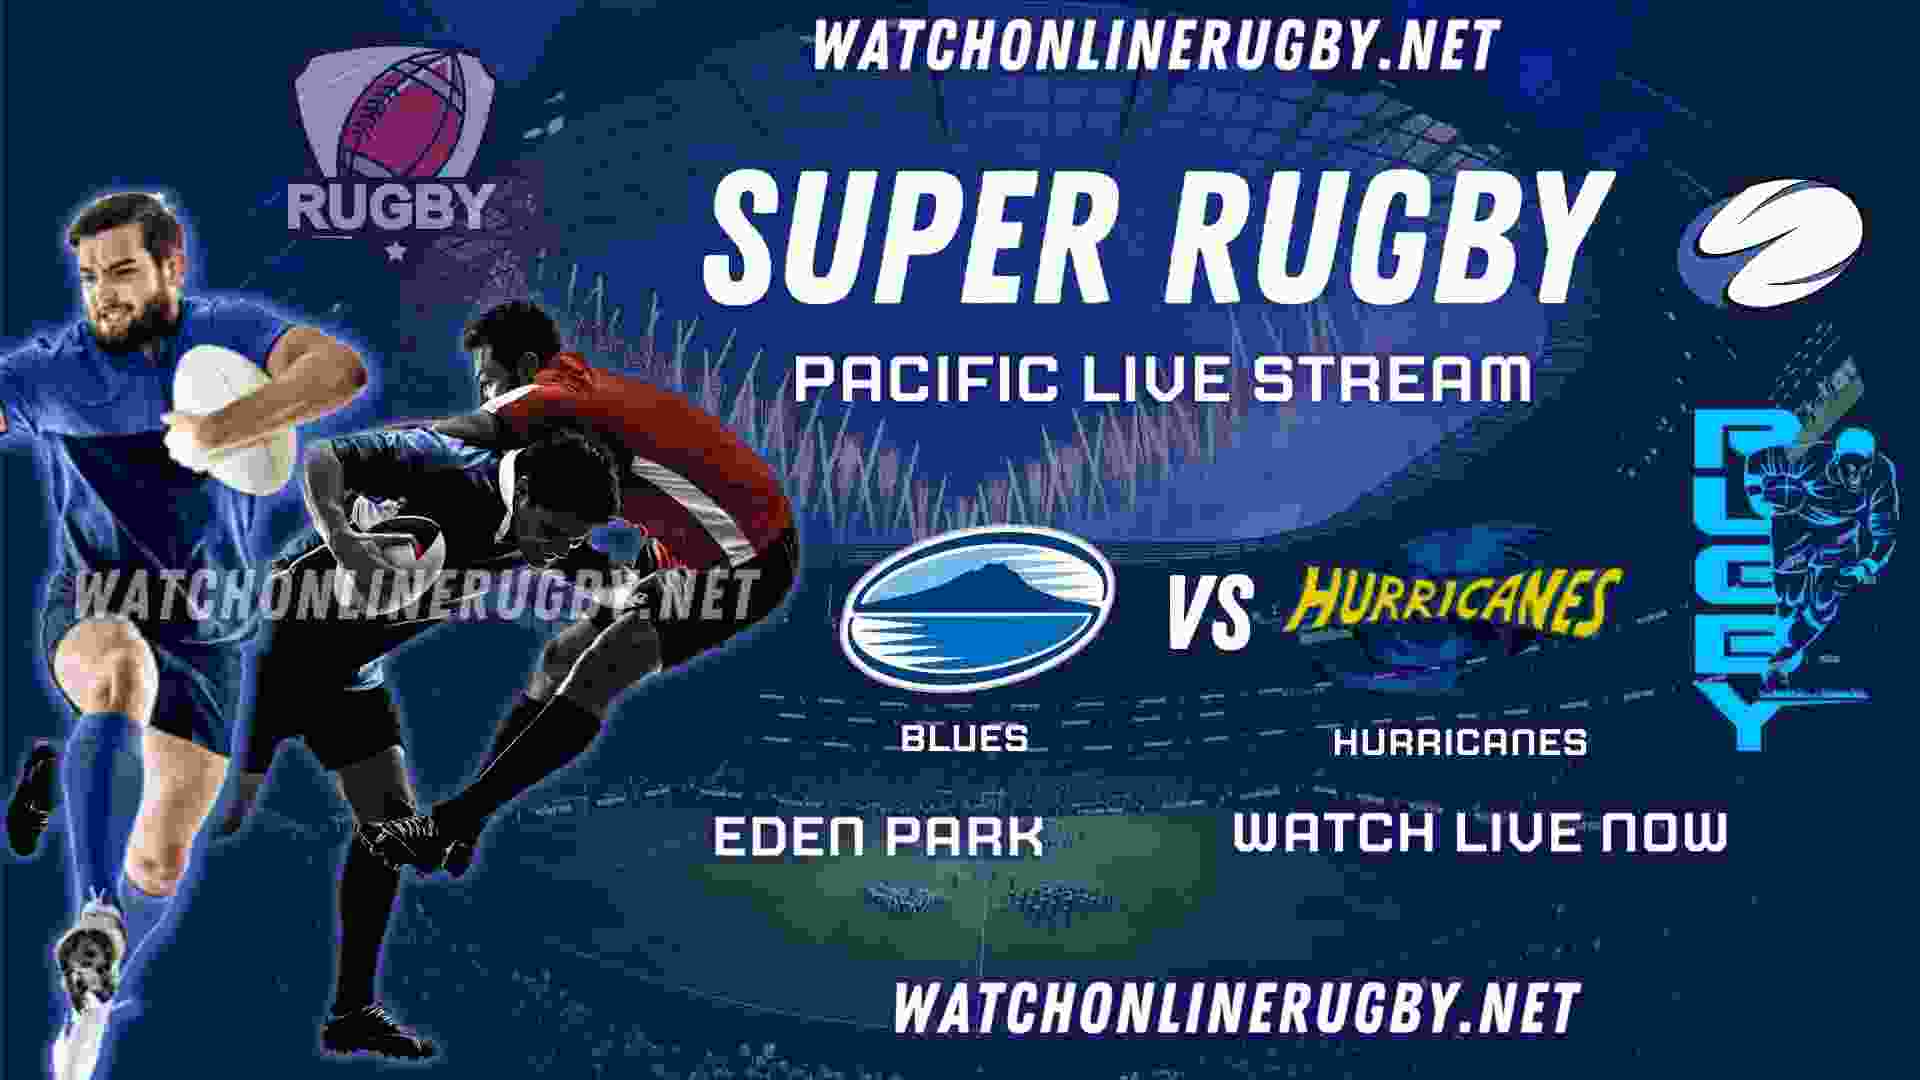 Hurricanes VS Blues Rugby Stream Live